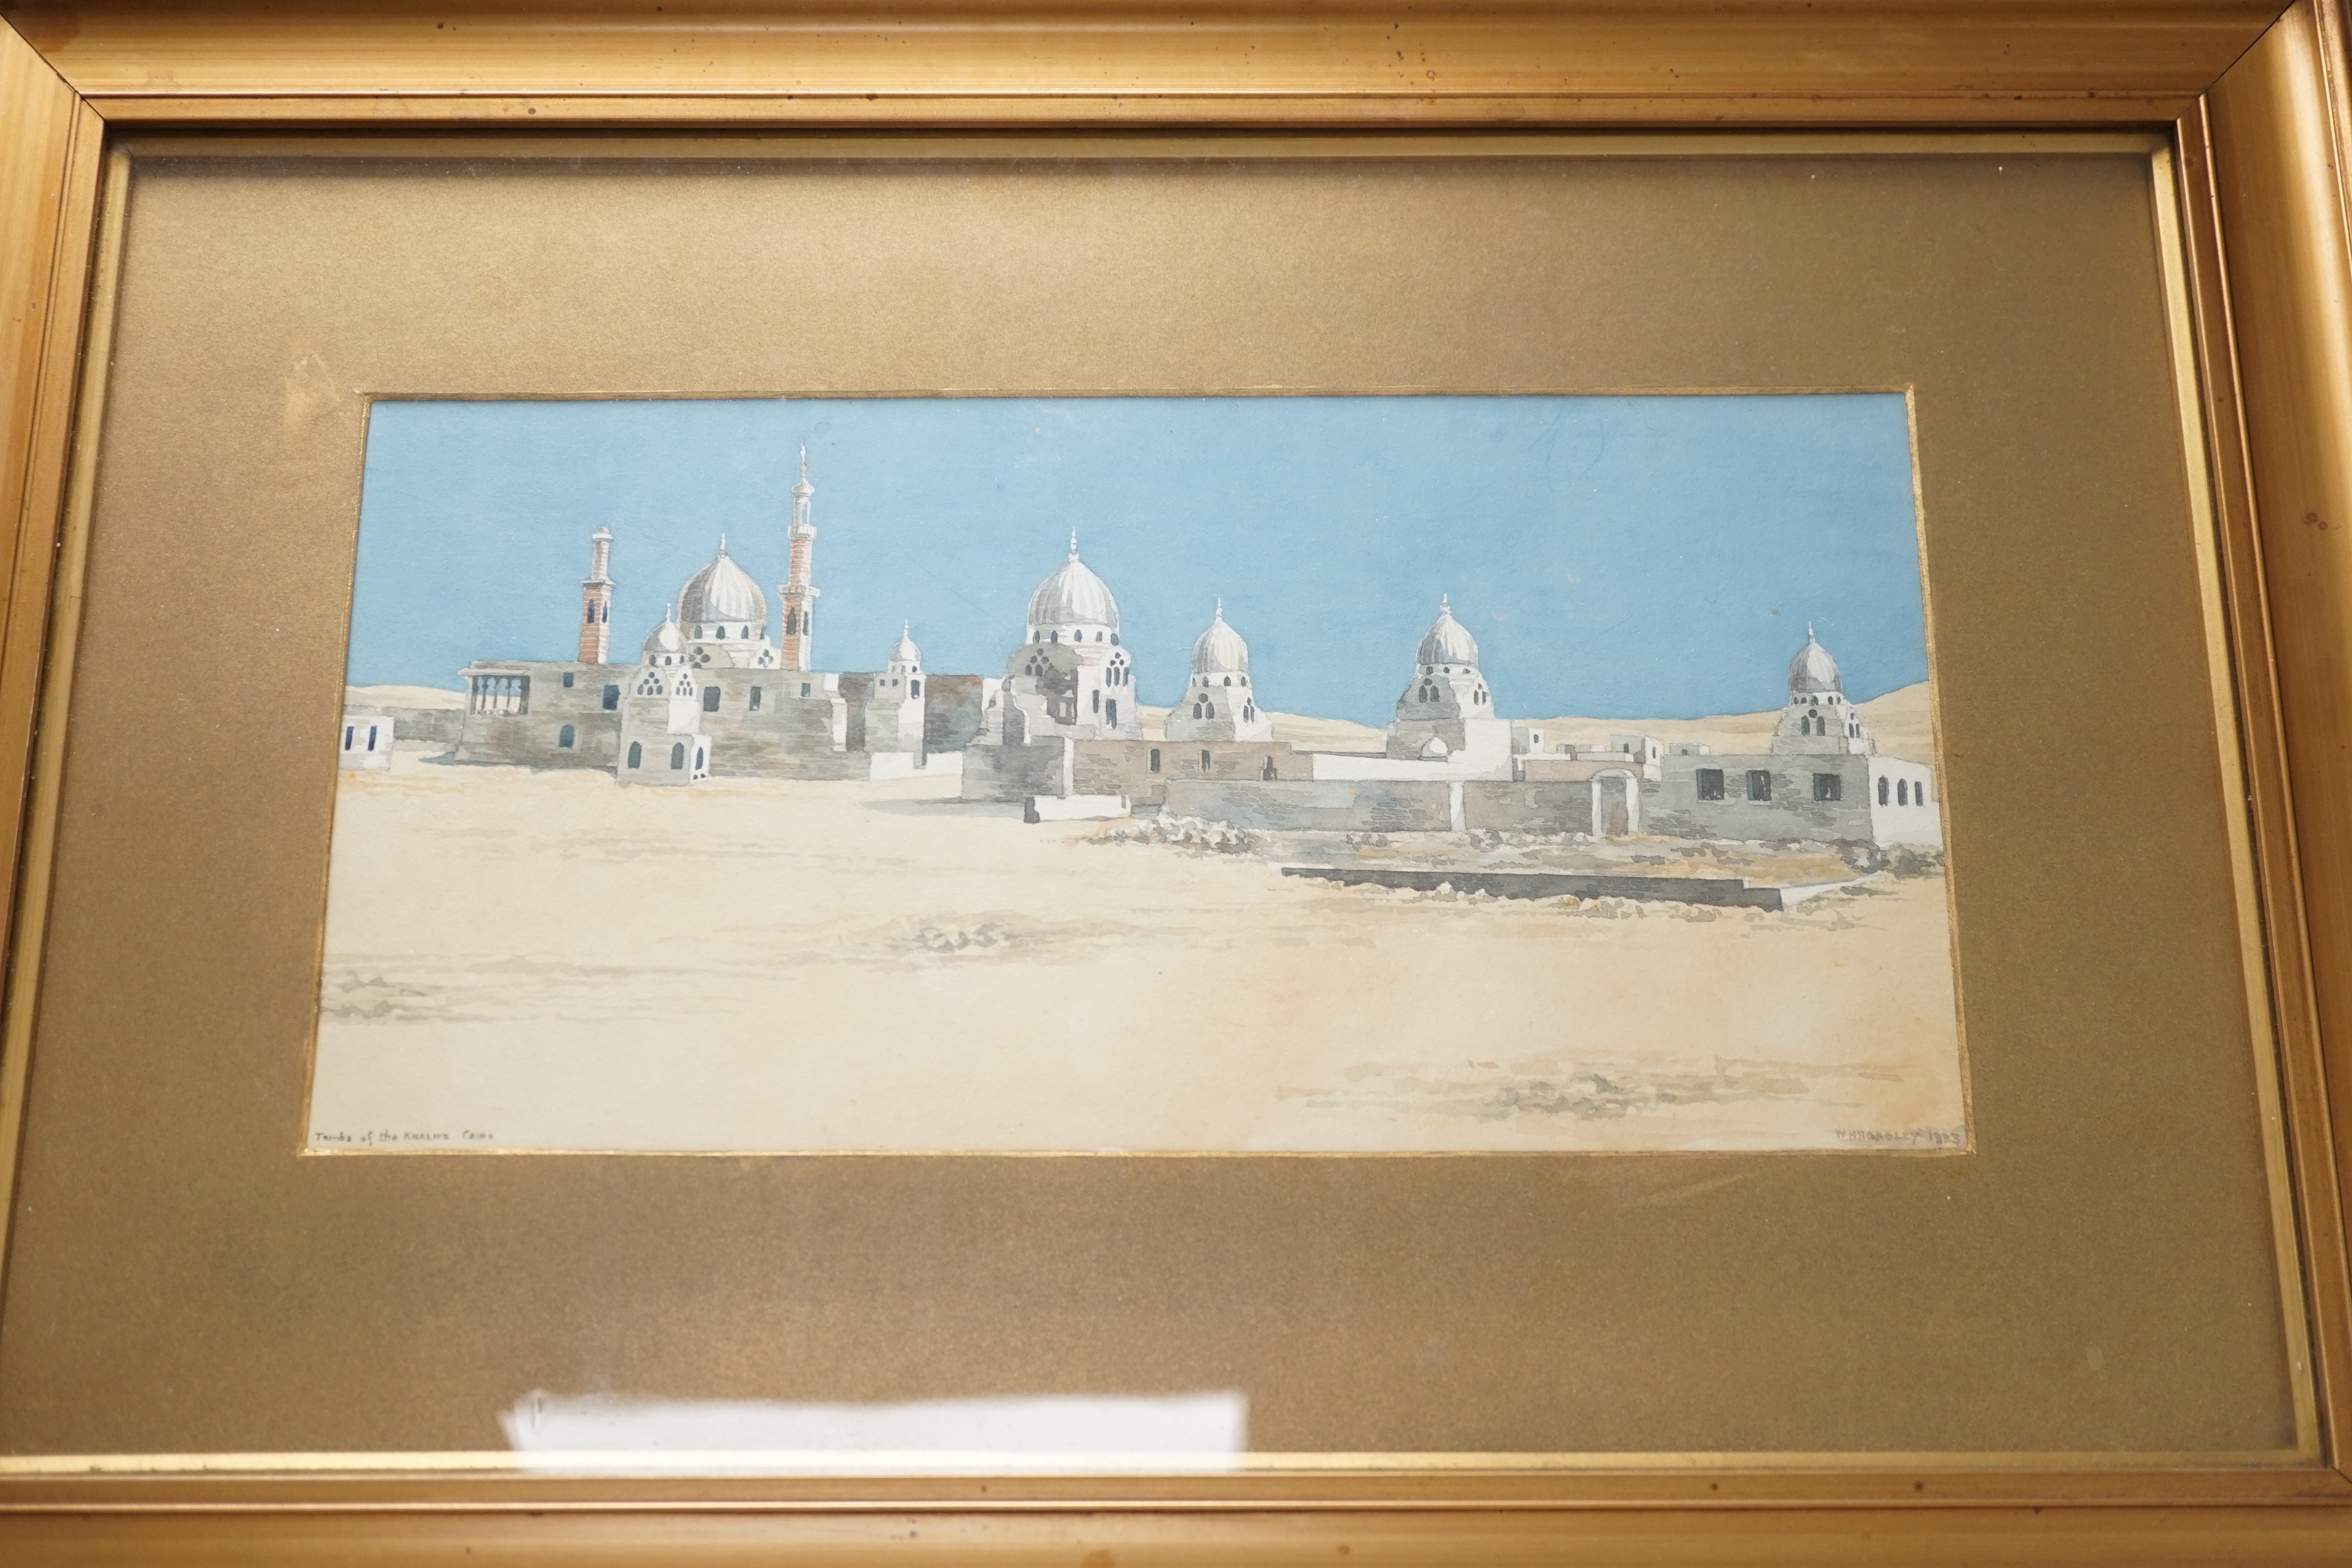 W.H. Hoadley, gouache, Tombs of the Khalifs, Cairo, signed, inscribed, and dated 1923, 17 x 35cm - Image 2 of 3